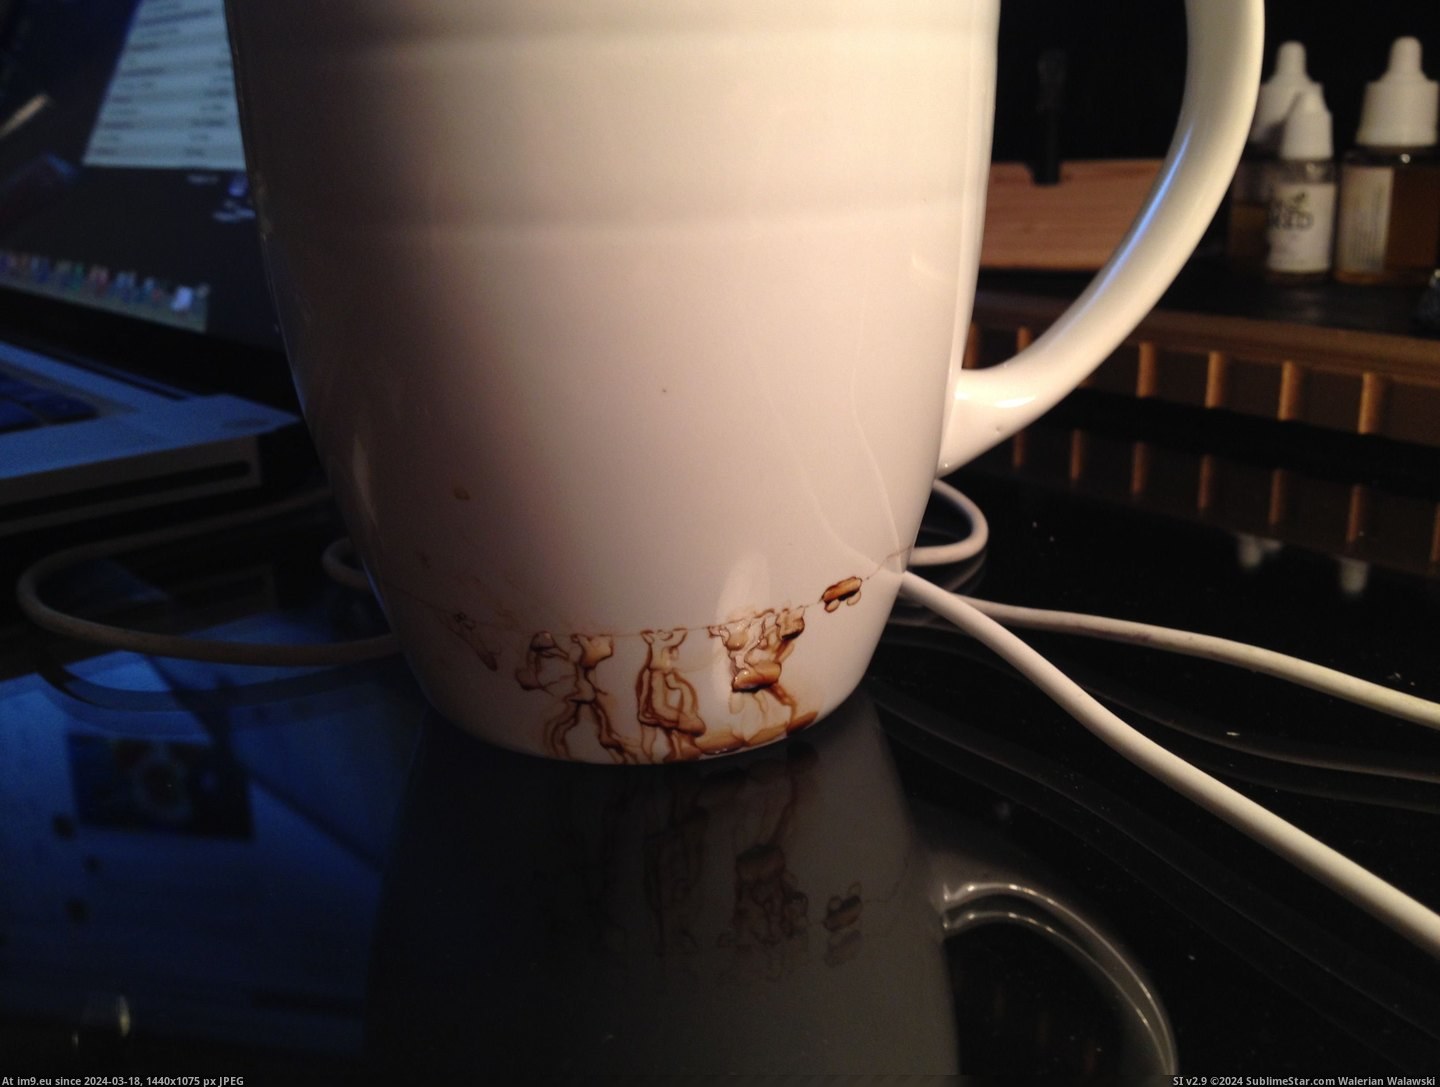 #Tiny #Coffee #Crack #Mug #Hour #Realize [Mildlyinteresting] Didn't realize my coffee mug had a tiny crack in it for about an hour. Pic. (Image of album My r/MILDLYINTERESTING favs))